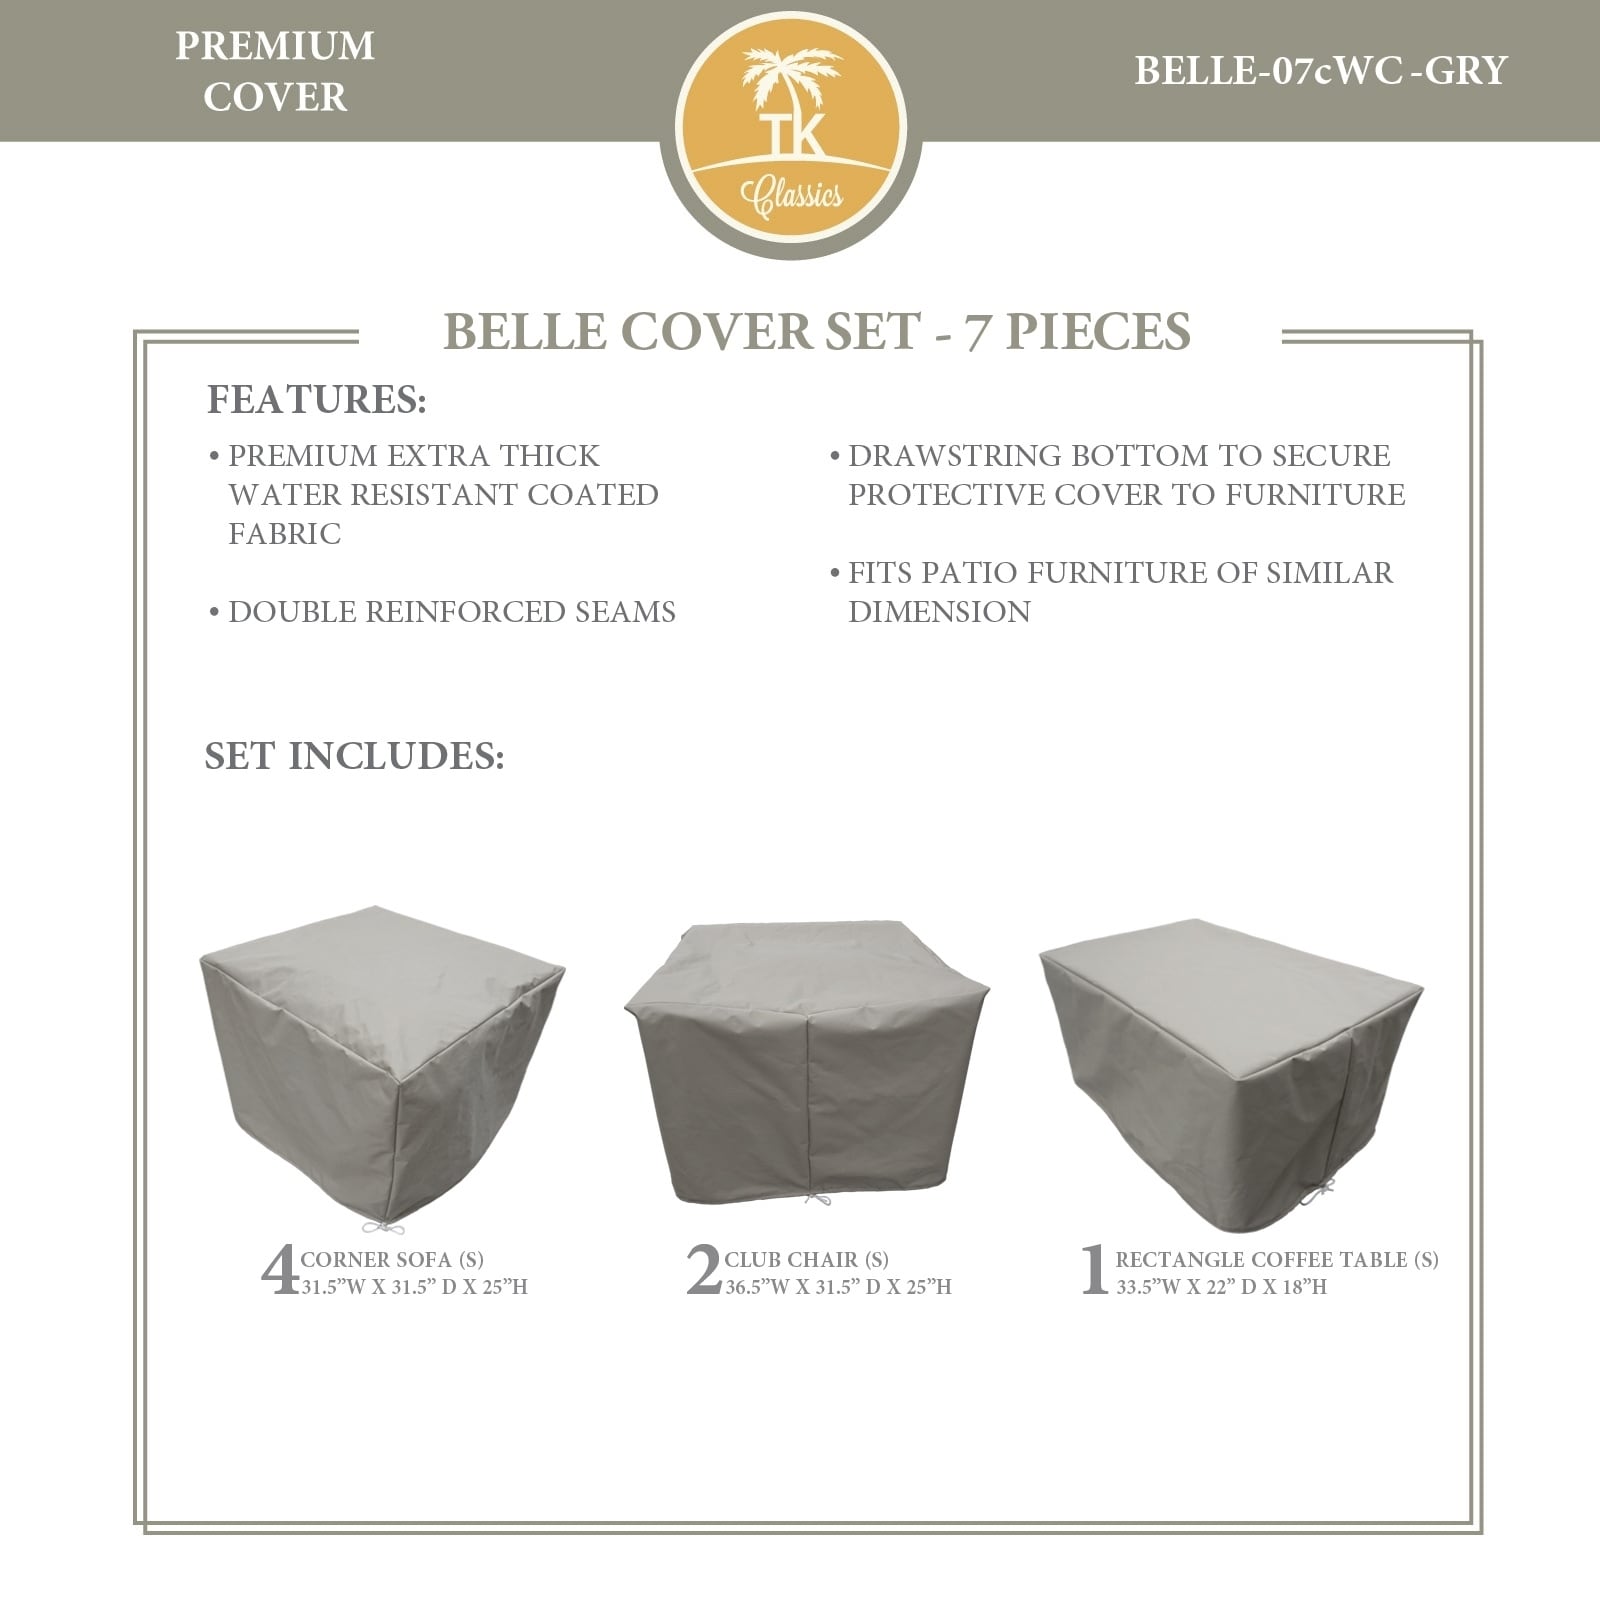 Belle 07c Protective Cover Set